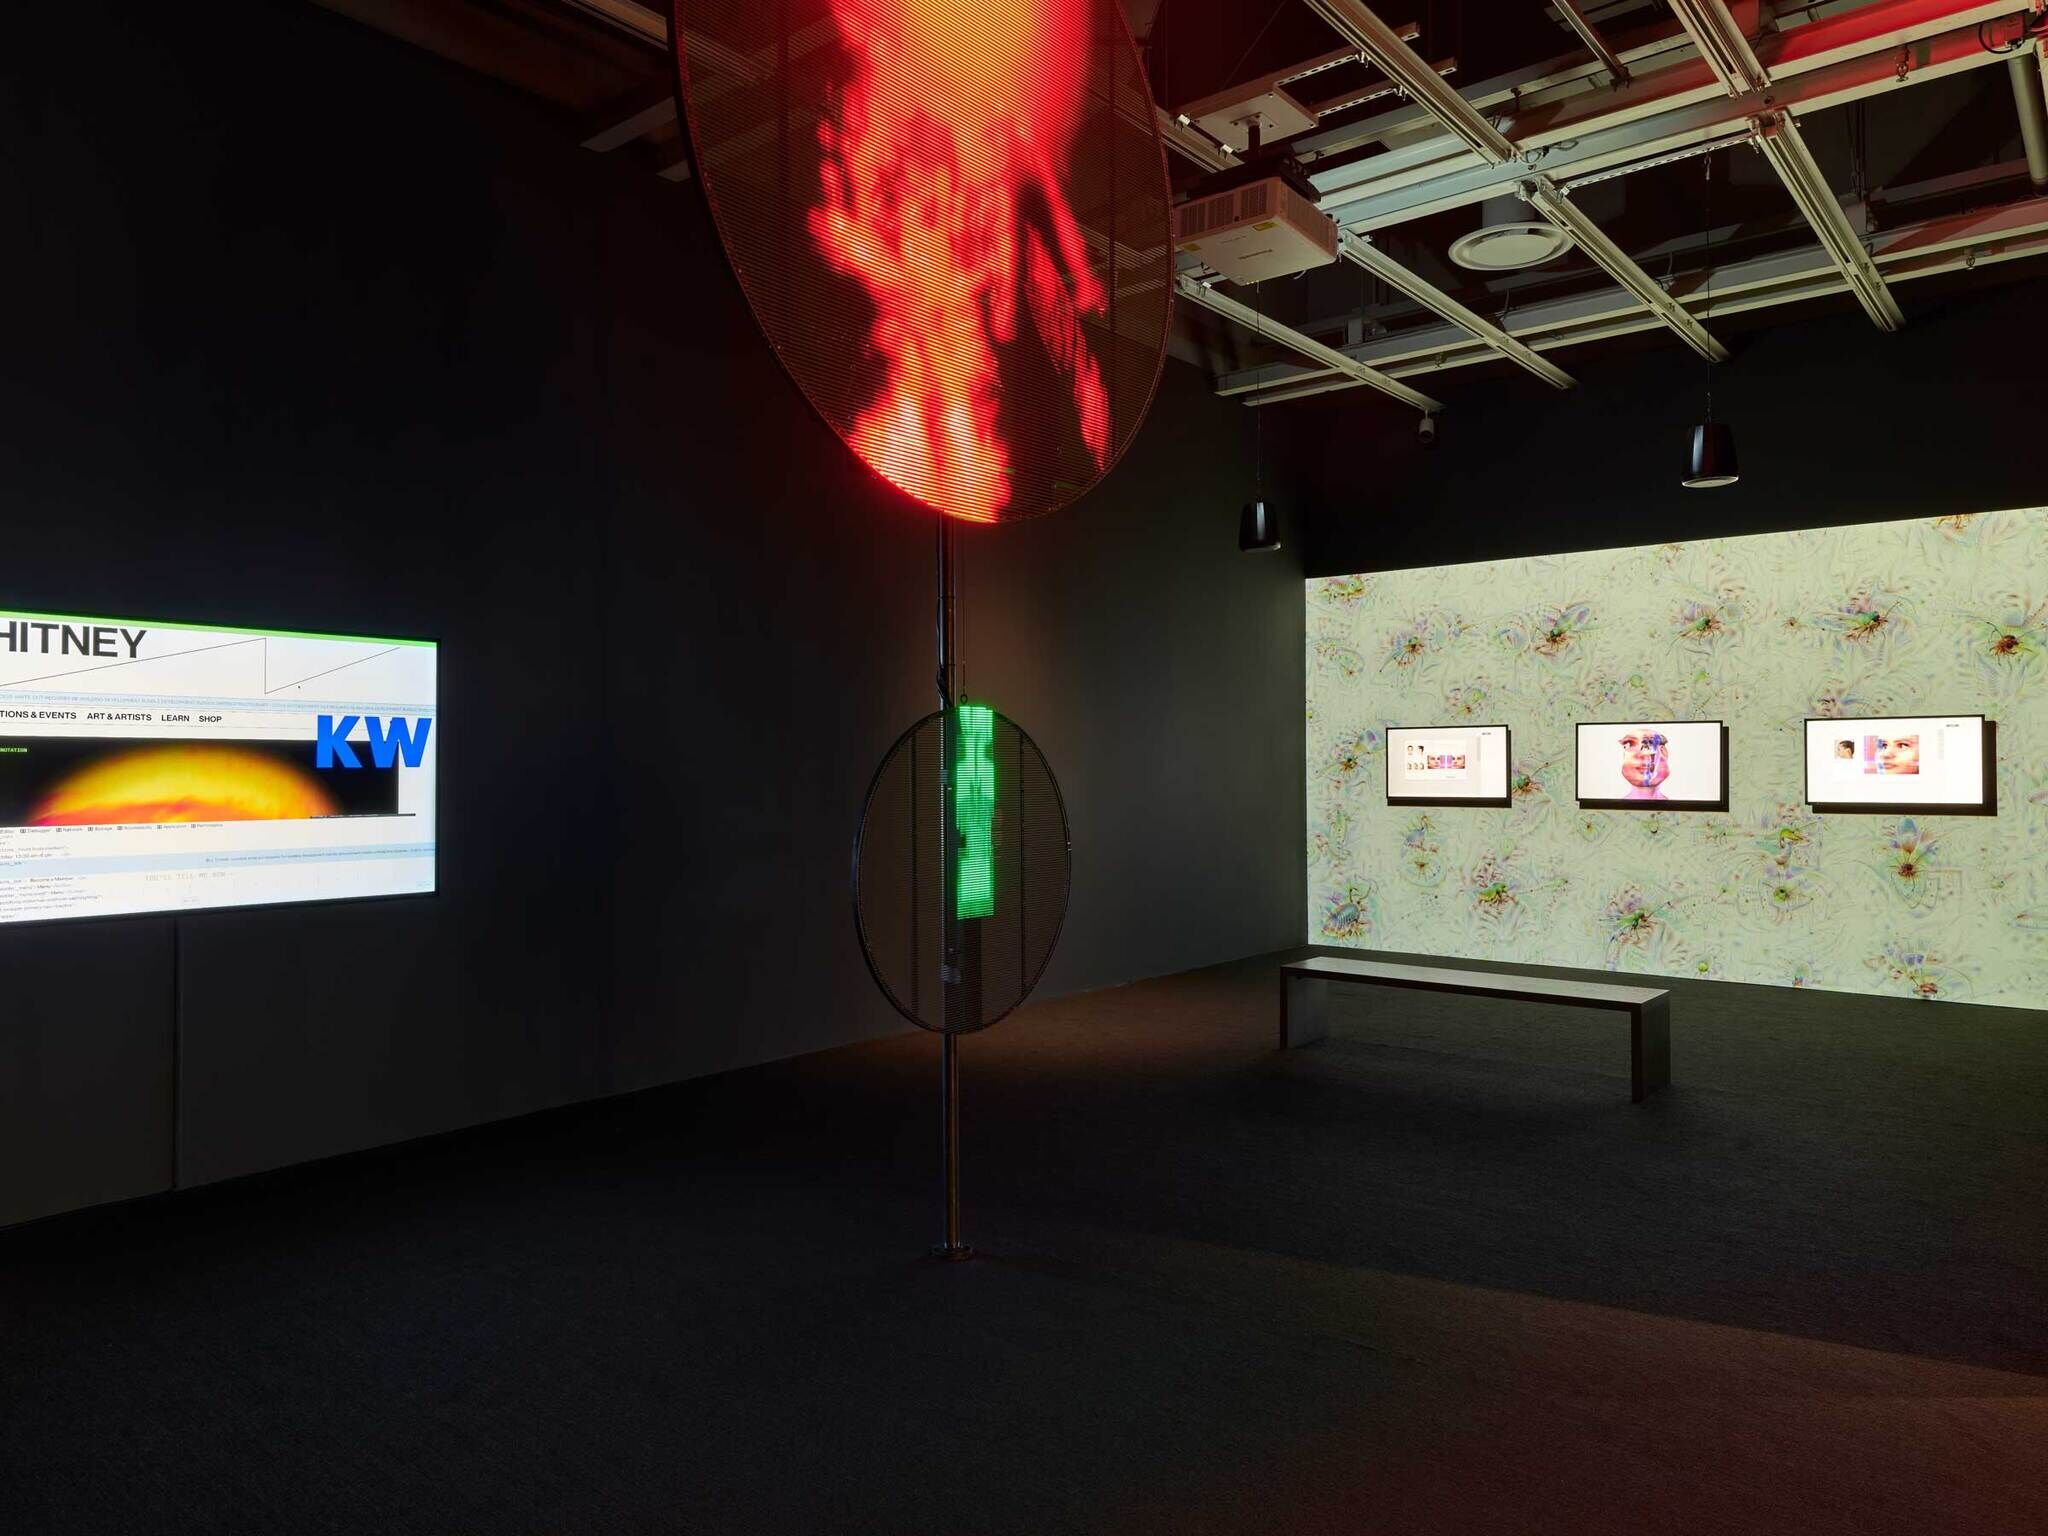 A dark room with a screen on the left to a Whitney museum page, two dark circular LED lights one red and one green, and a big screen with three smaller screens on it on the right with a green background and humanoid faces on the smaller screens.